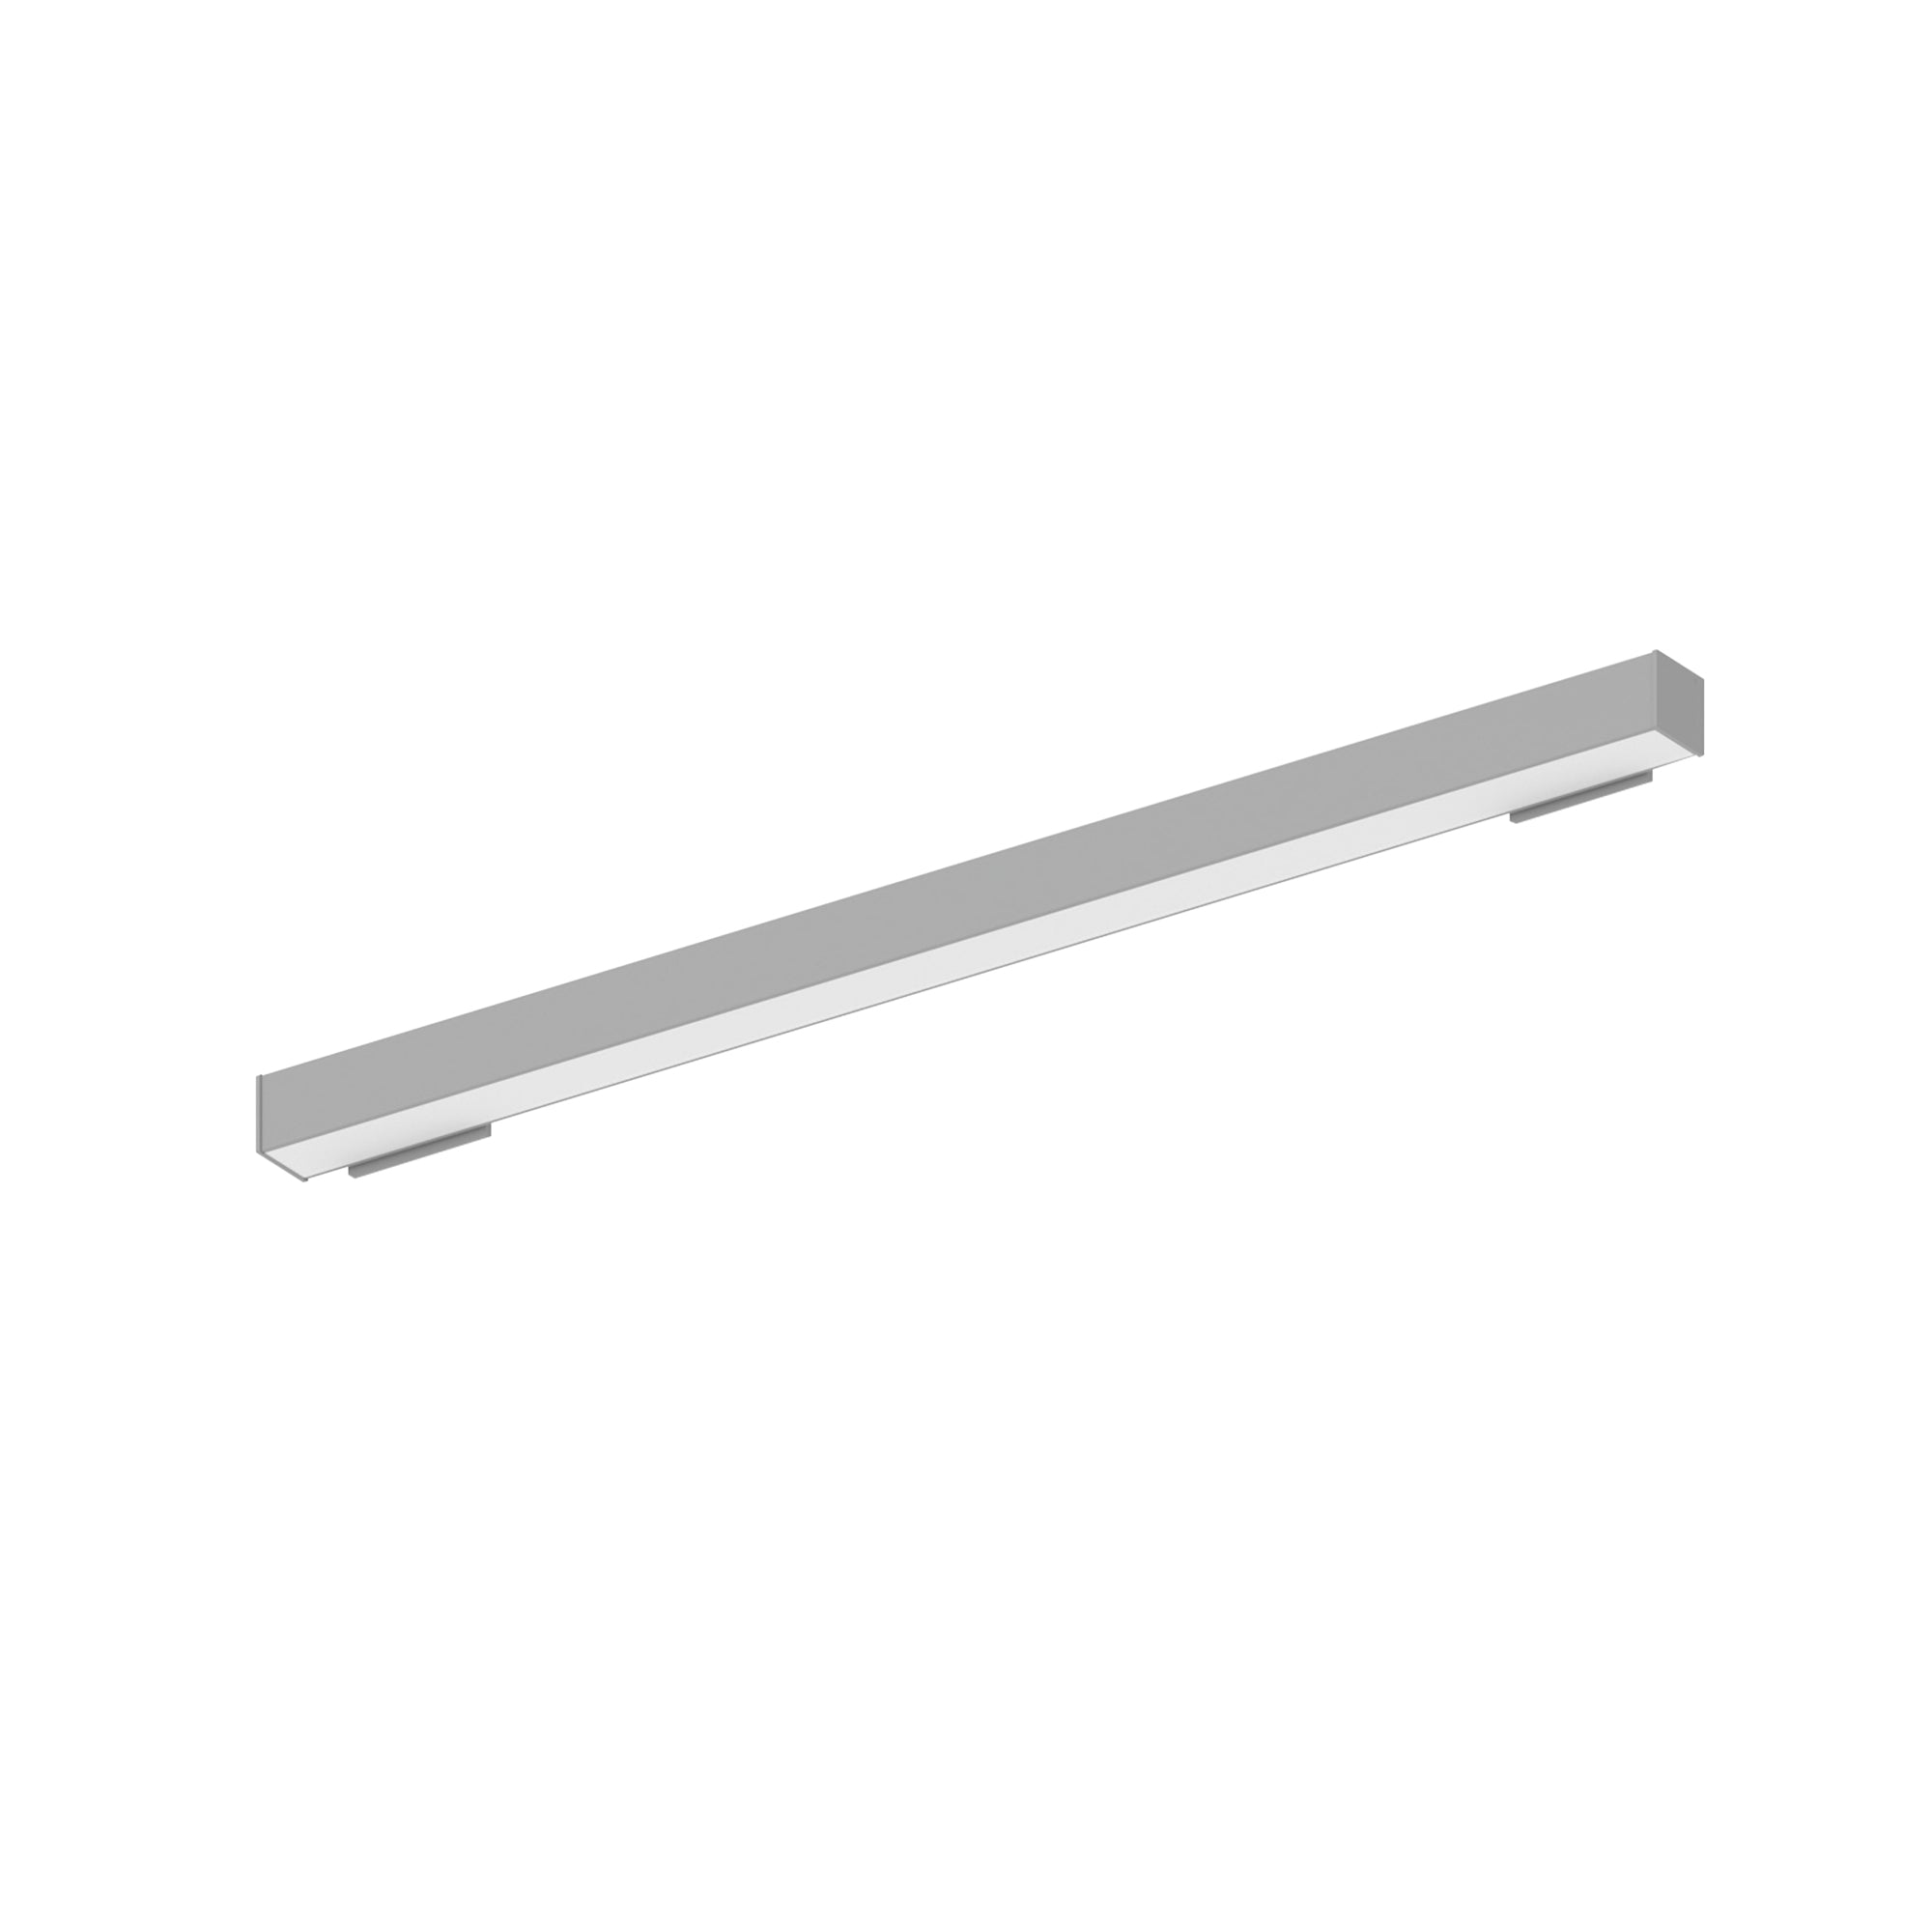 Nora Lighting NWLIN-41030A/L2-R2 - Linear - 4' L-Line LED Wall Mount Linear, 4200lm / 3000K, 2 Inchx4 Inch Left Plate & 2 Inchx4 Inch Right Plate, Aluminum Finish